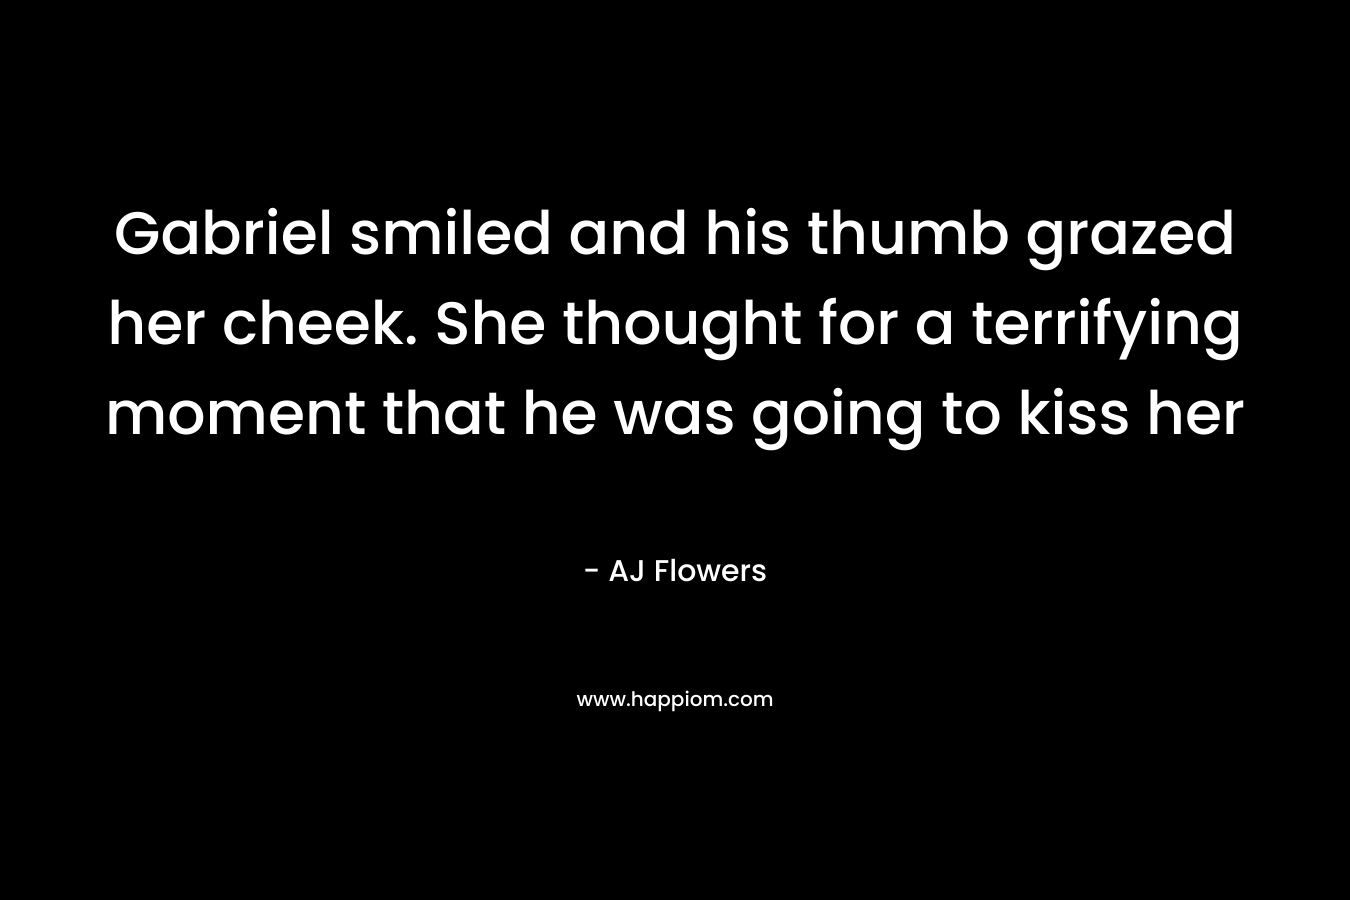 Gabriel smiled and his thumb grazed her cheek. She thought for a terrifying moment that he was going to kiss her